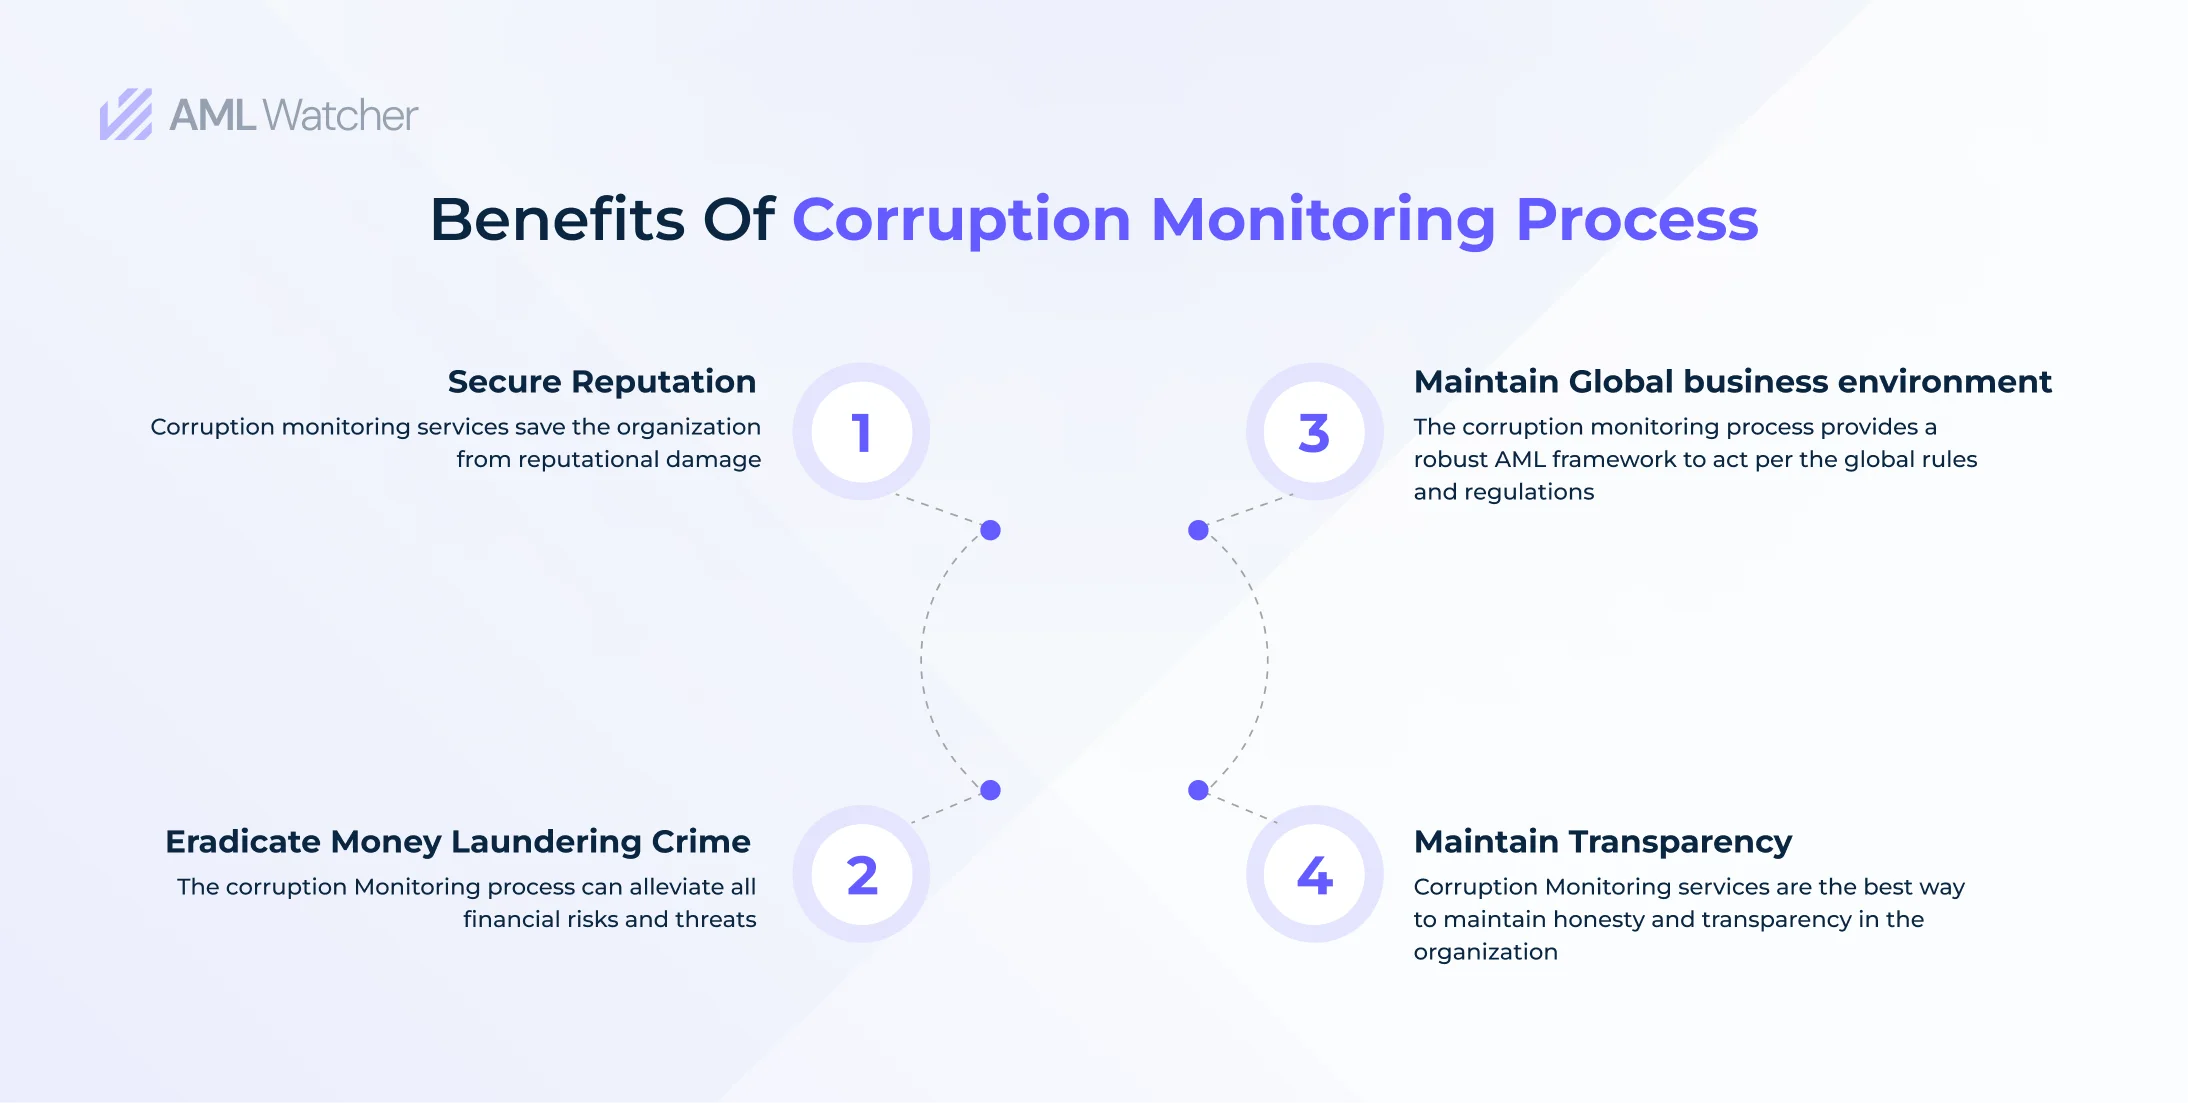 The Corruption Monitoring process provides a shield to a large number of organizations. 